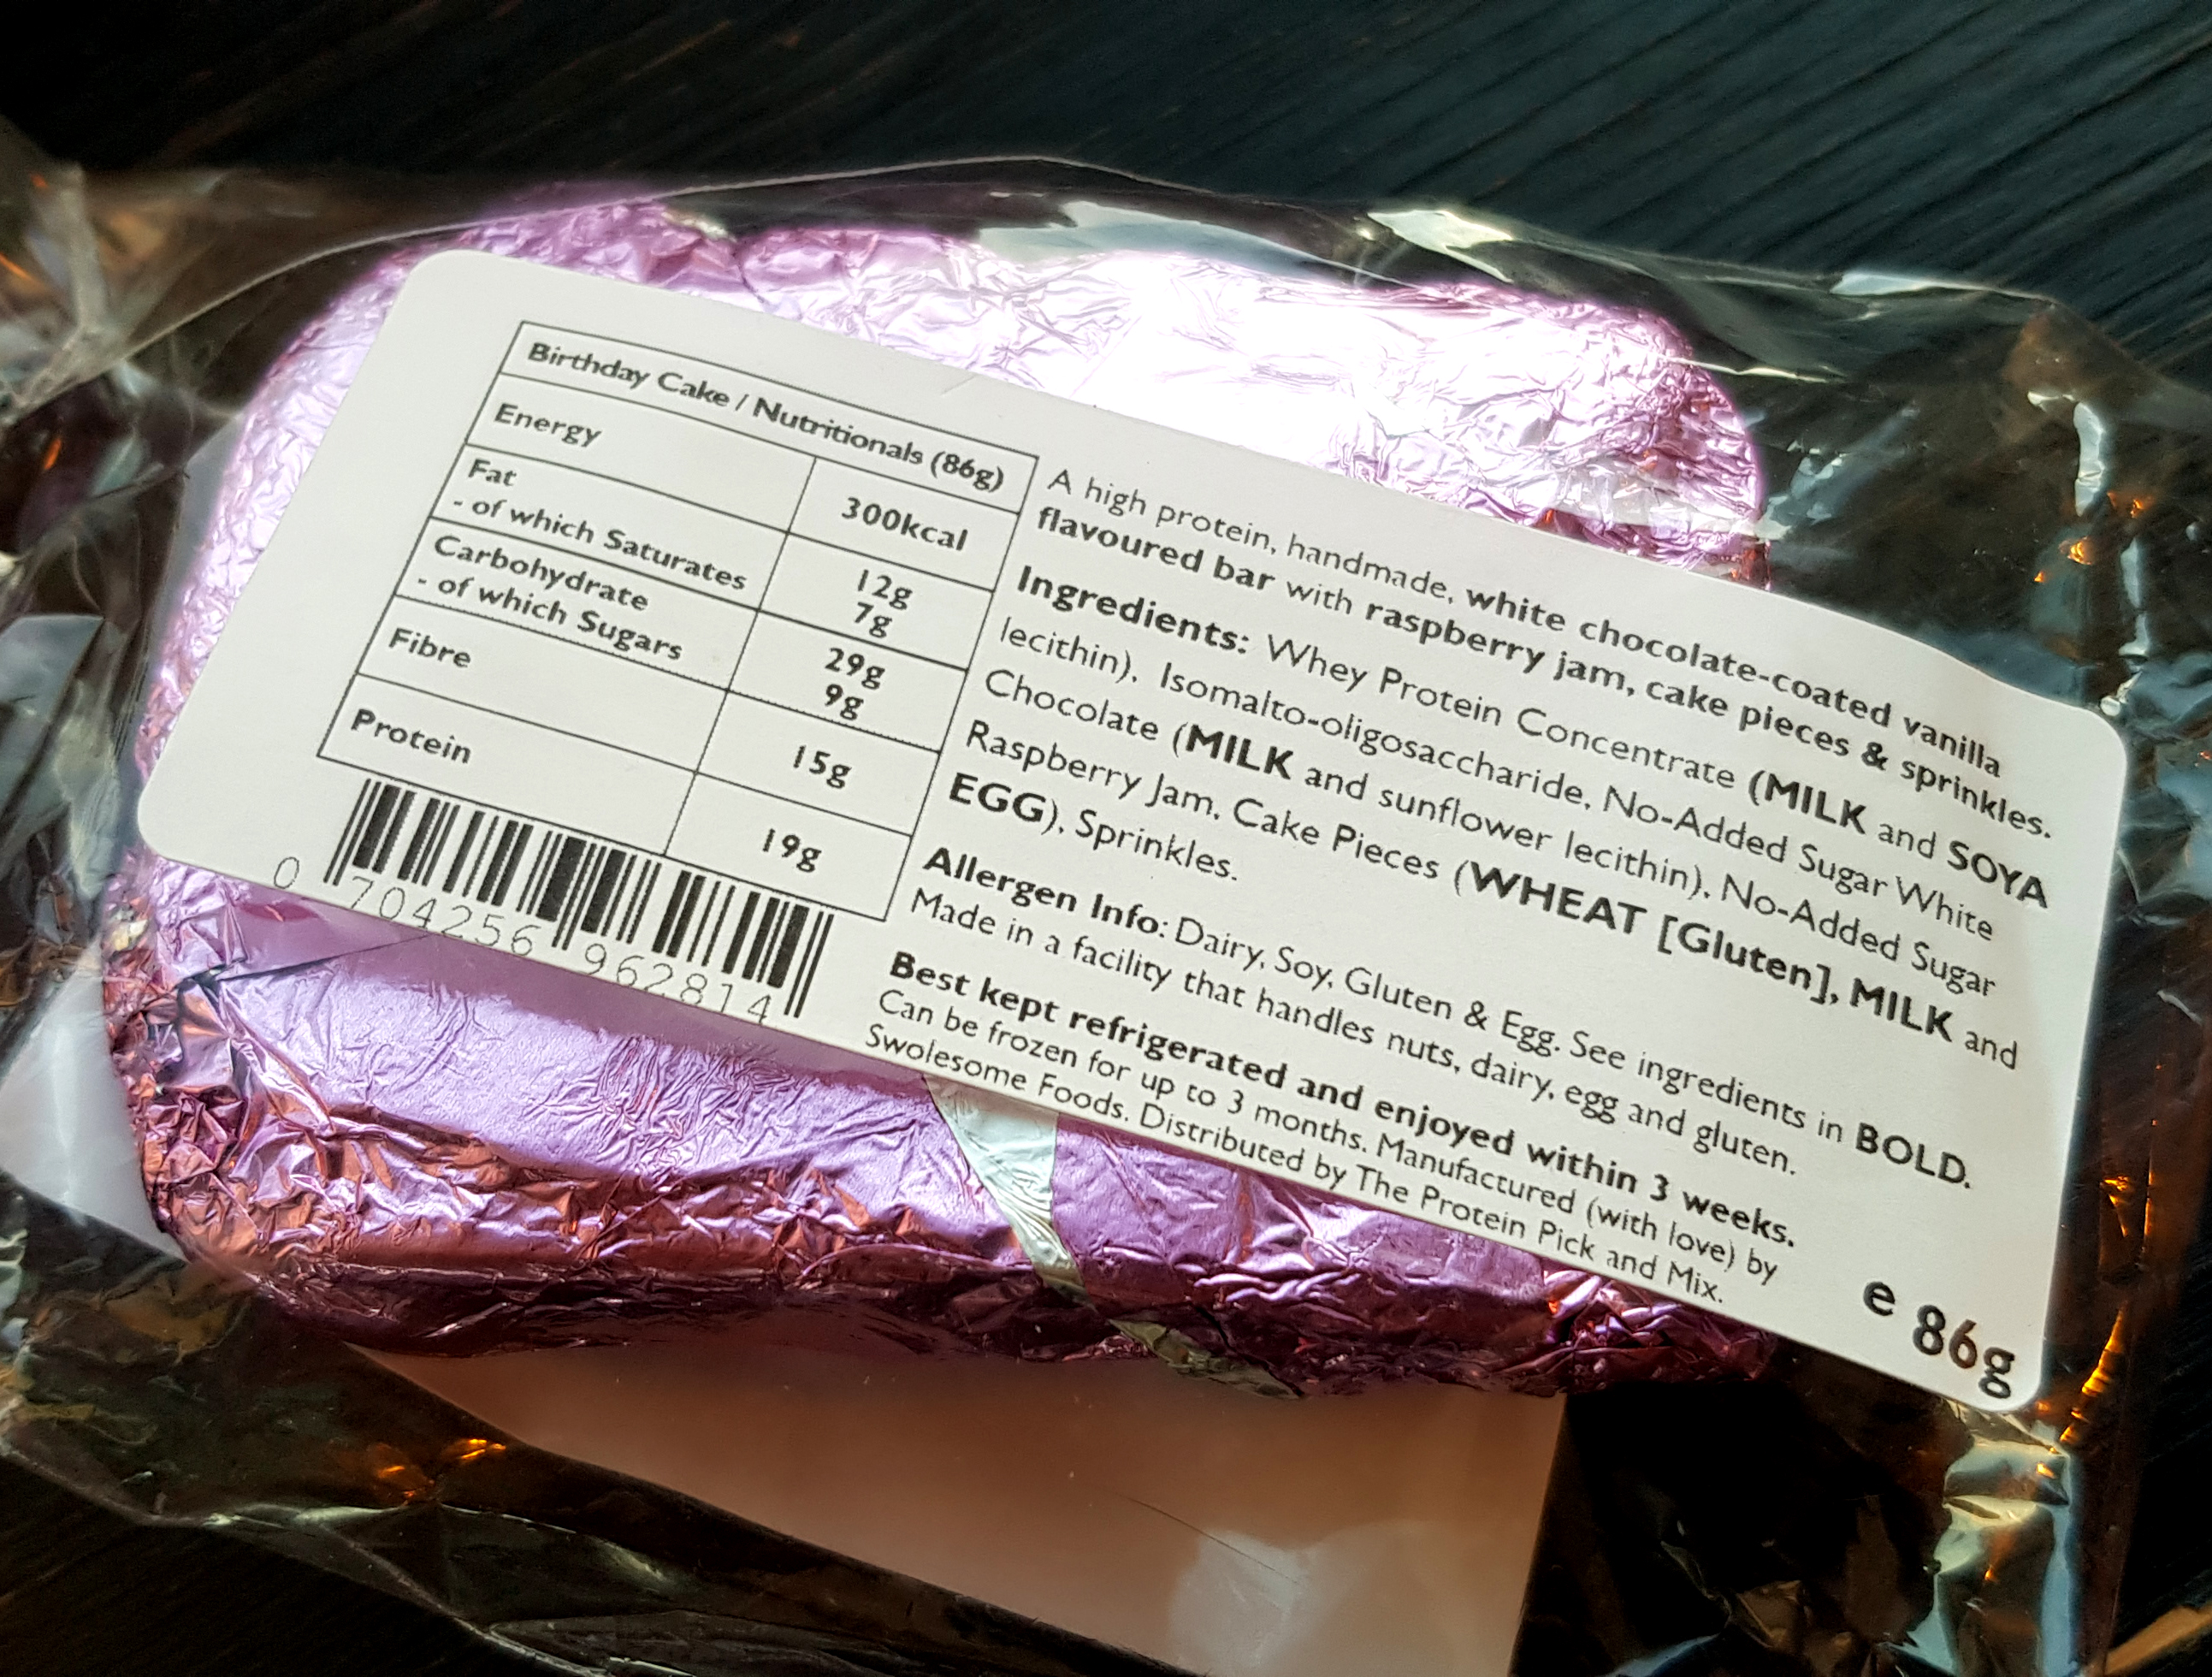 Funder Bar, Birthday Cake - ingredients and nutritional values